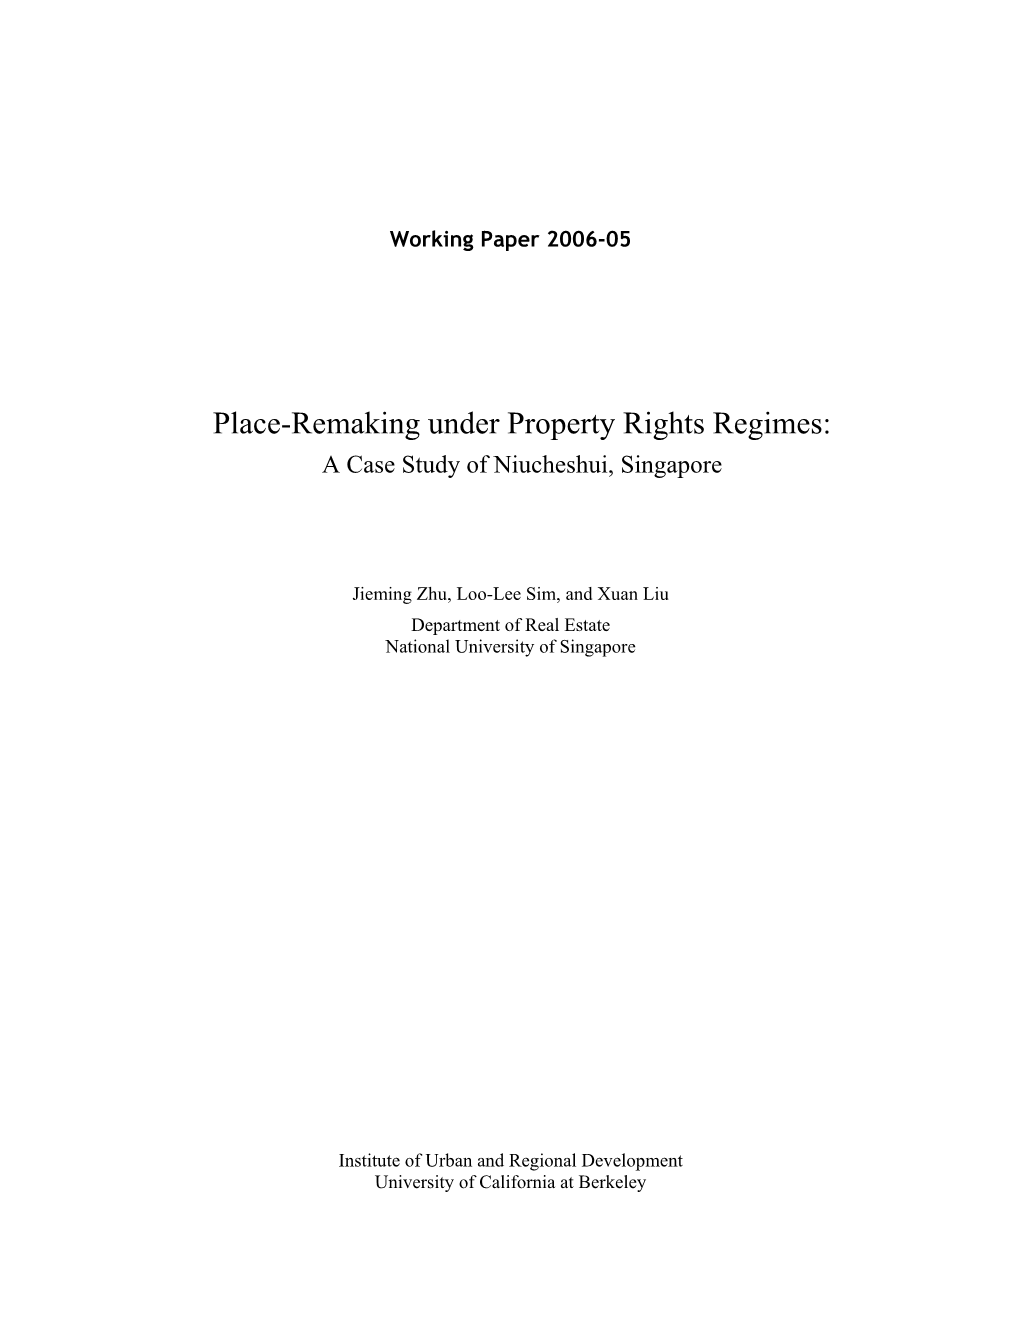 Place-Remaking Under Property Rights Regimes: a Case Study of Niucheshui, Singapore